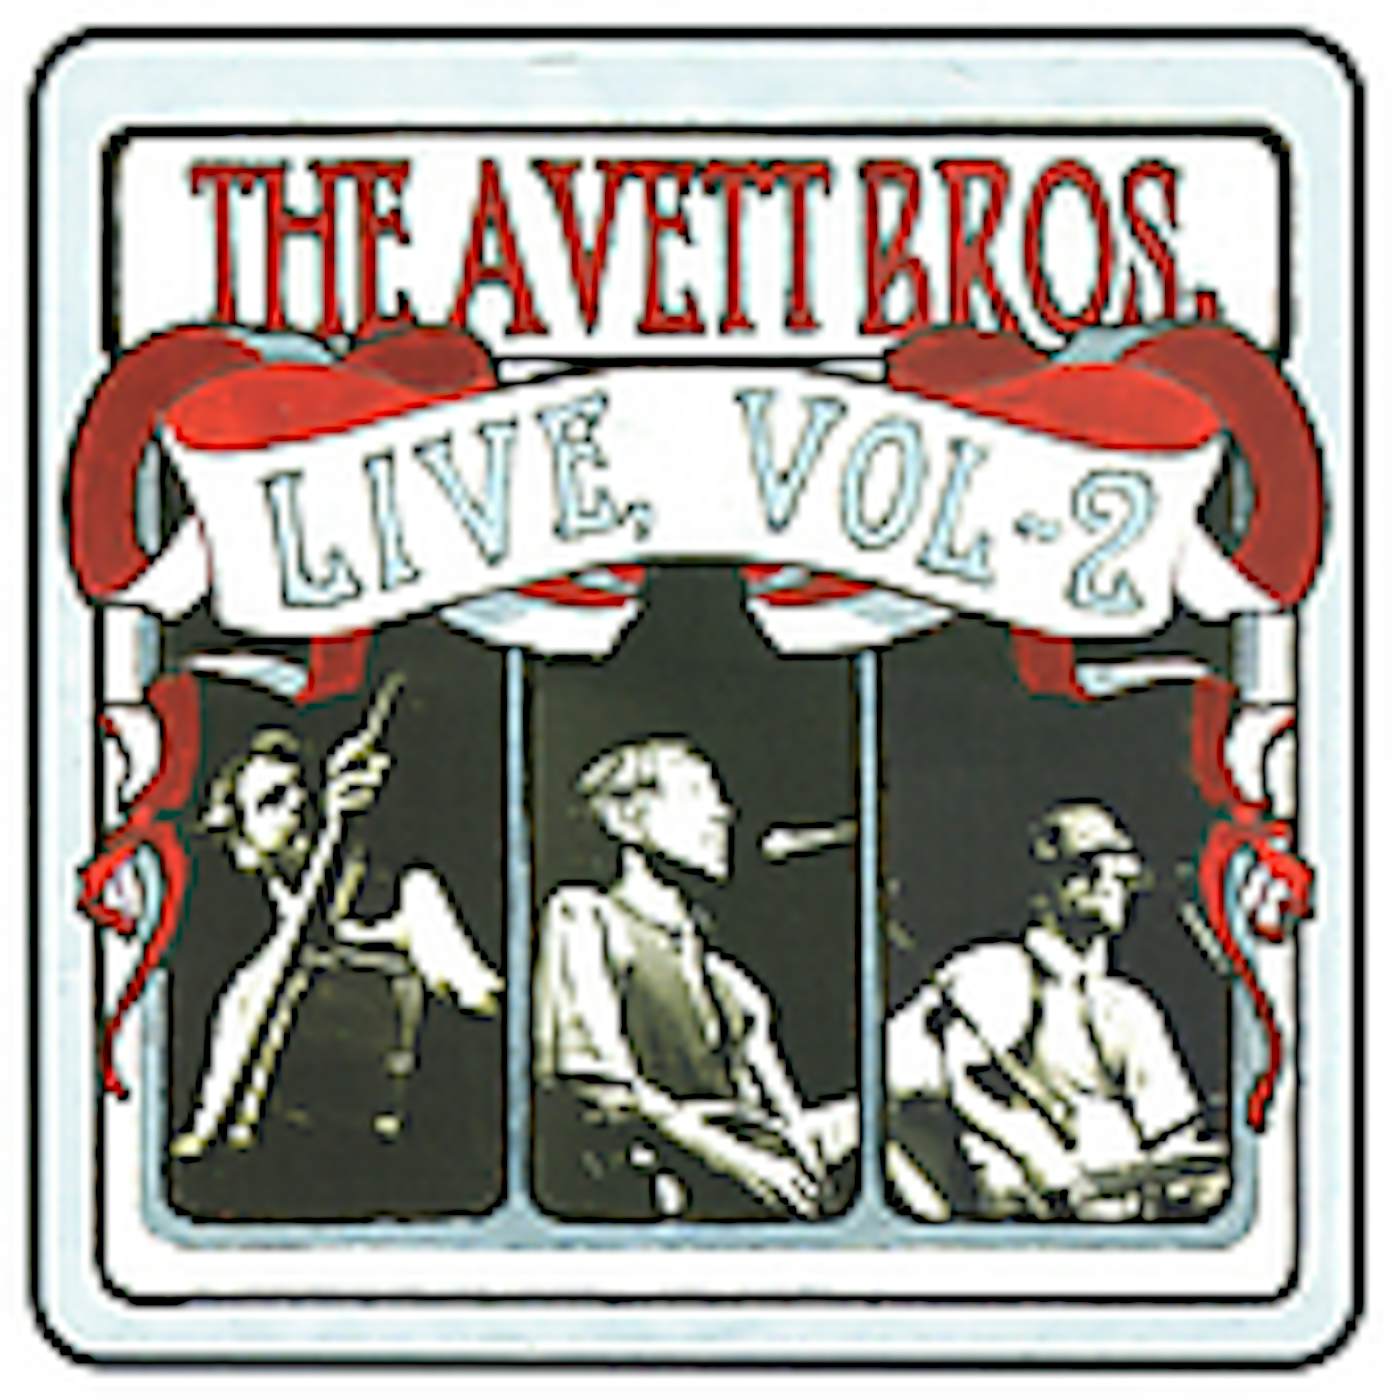 The Avett Brothers LIVE 2 CD